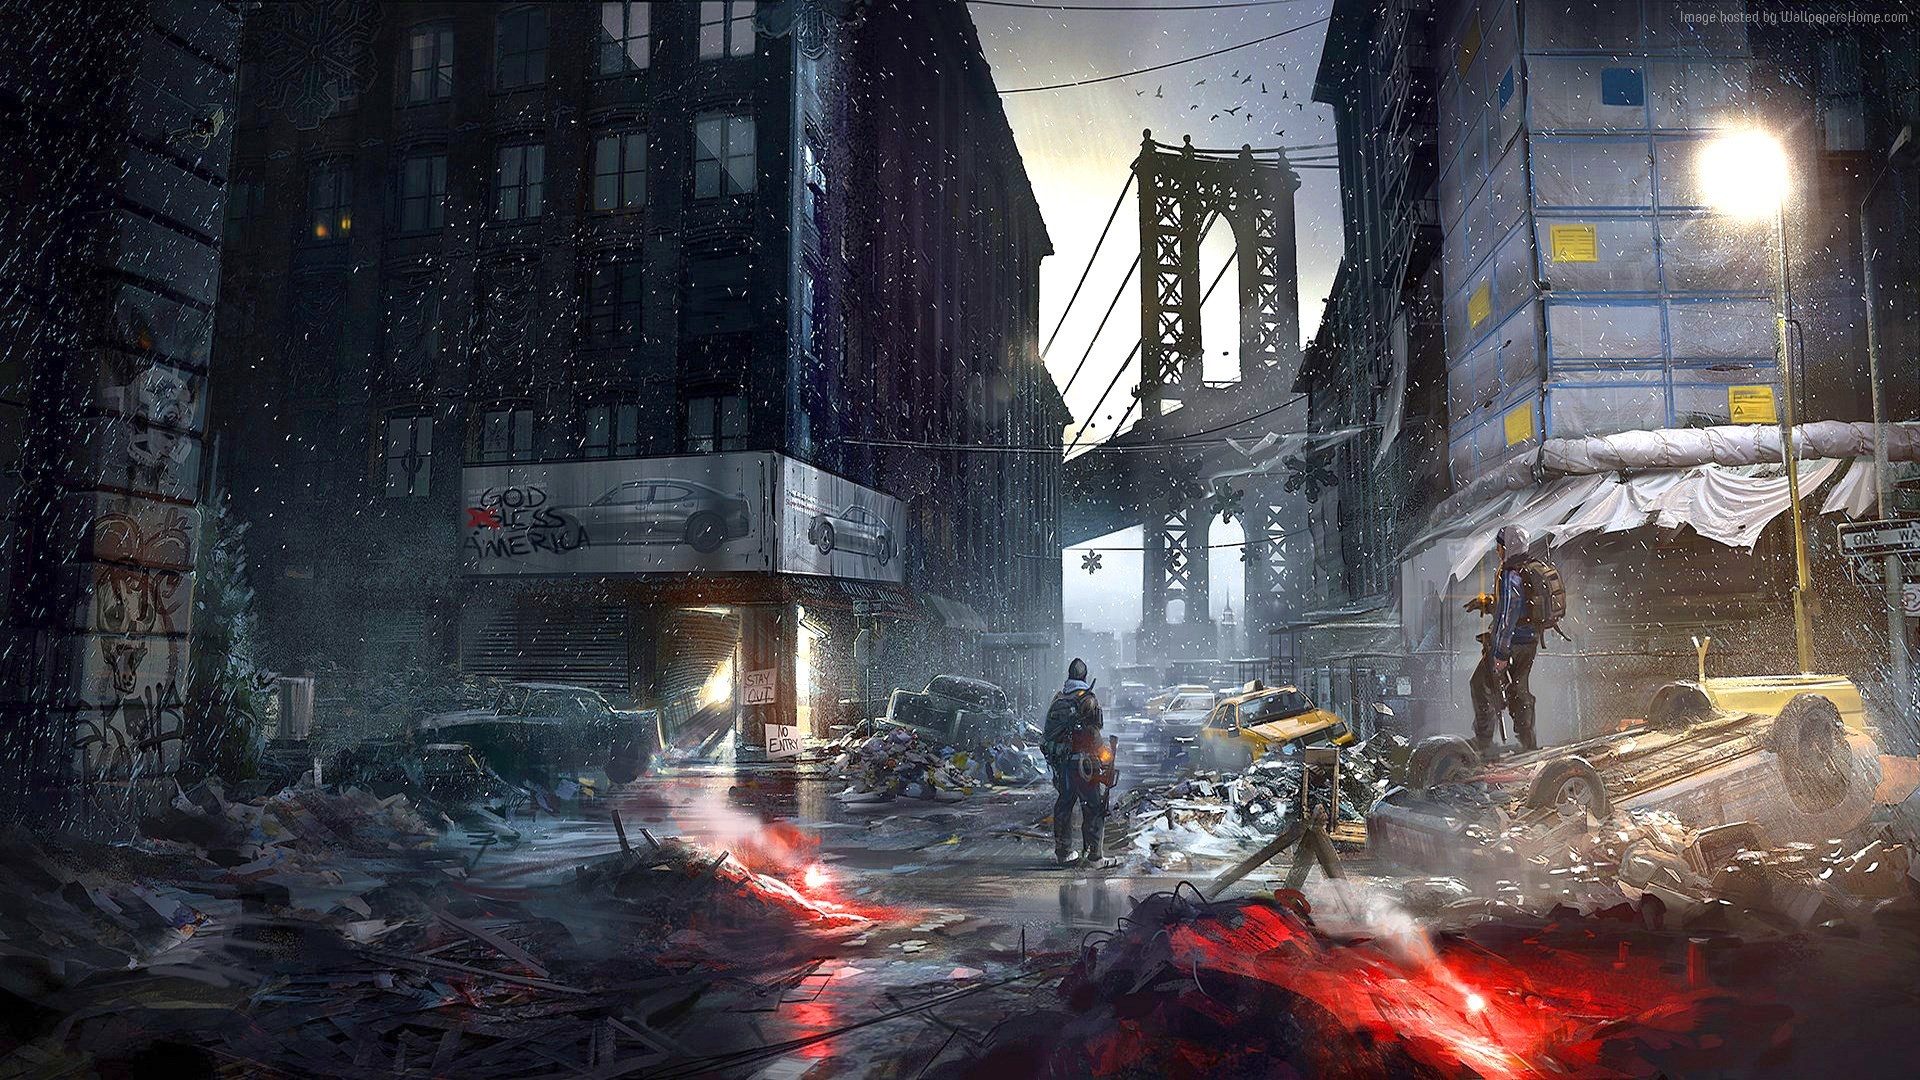 1920x1080 Wallpaper The Division, Tom Clancy's, game, apocalypse, PS4, xBox One, PC,  screenshot, 4k, 5k, 2015, Games #4397. The more wallpapers you see, the  better ...